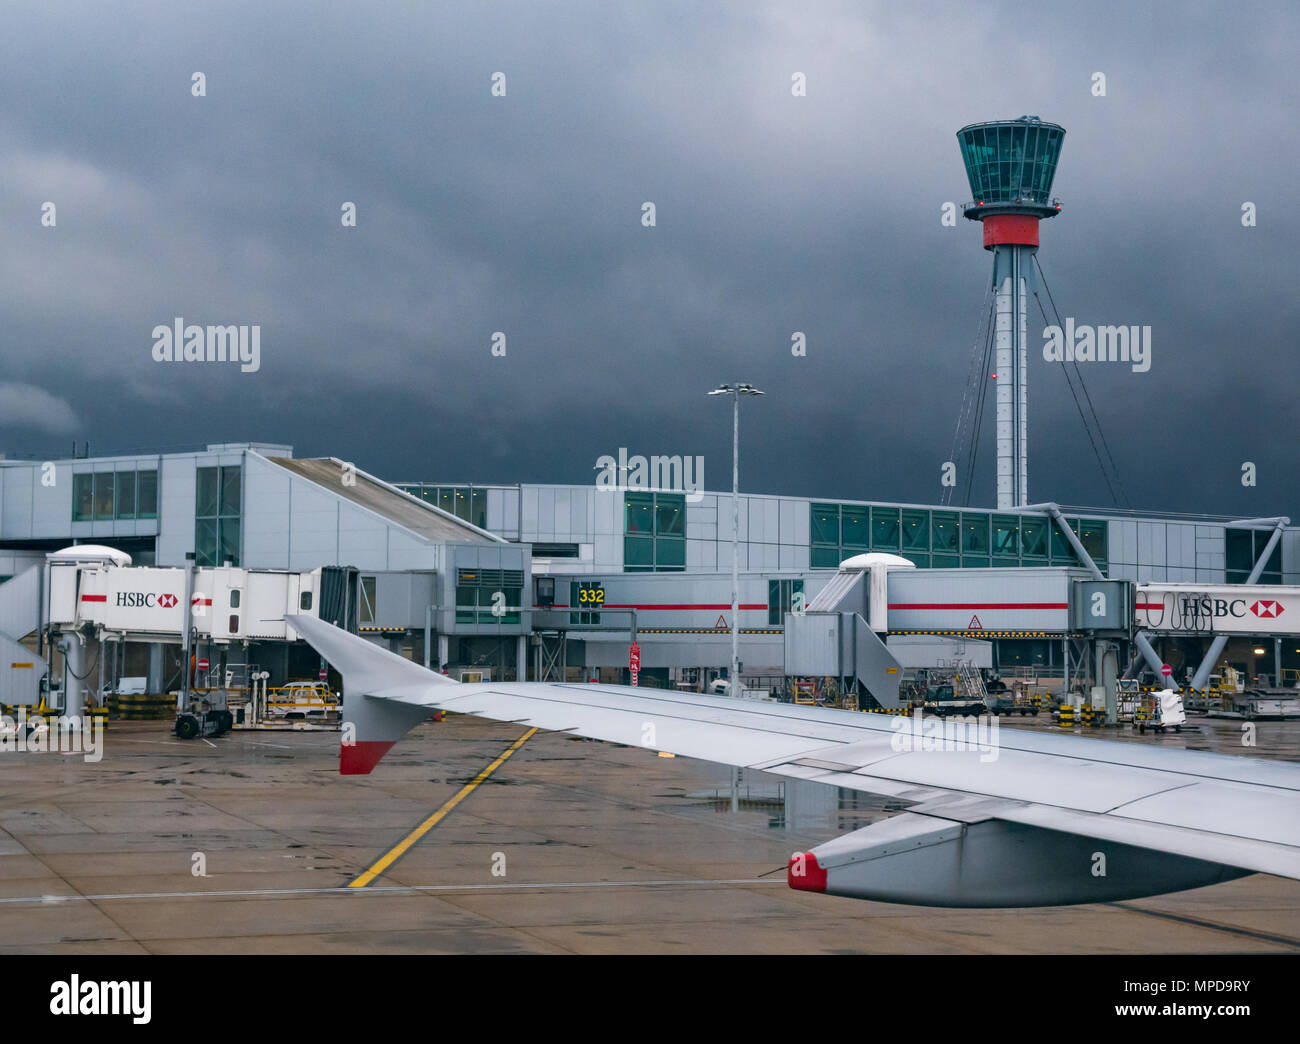 View of sky bridges, Terminal 5, Heathrow airport, London, England, UK, taken from plane window, with plane wing and control tower visible. Stock Photo